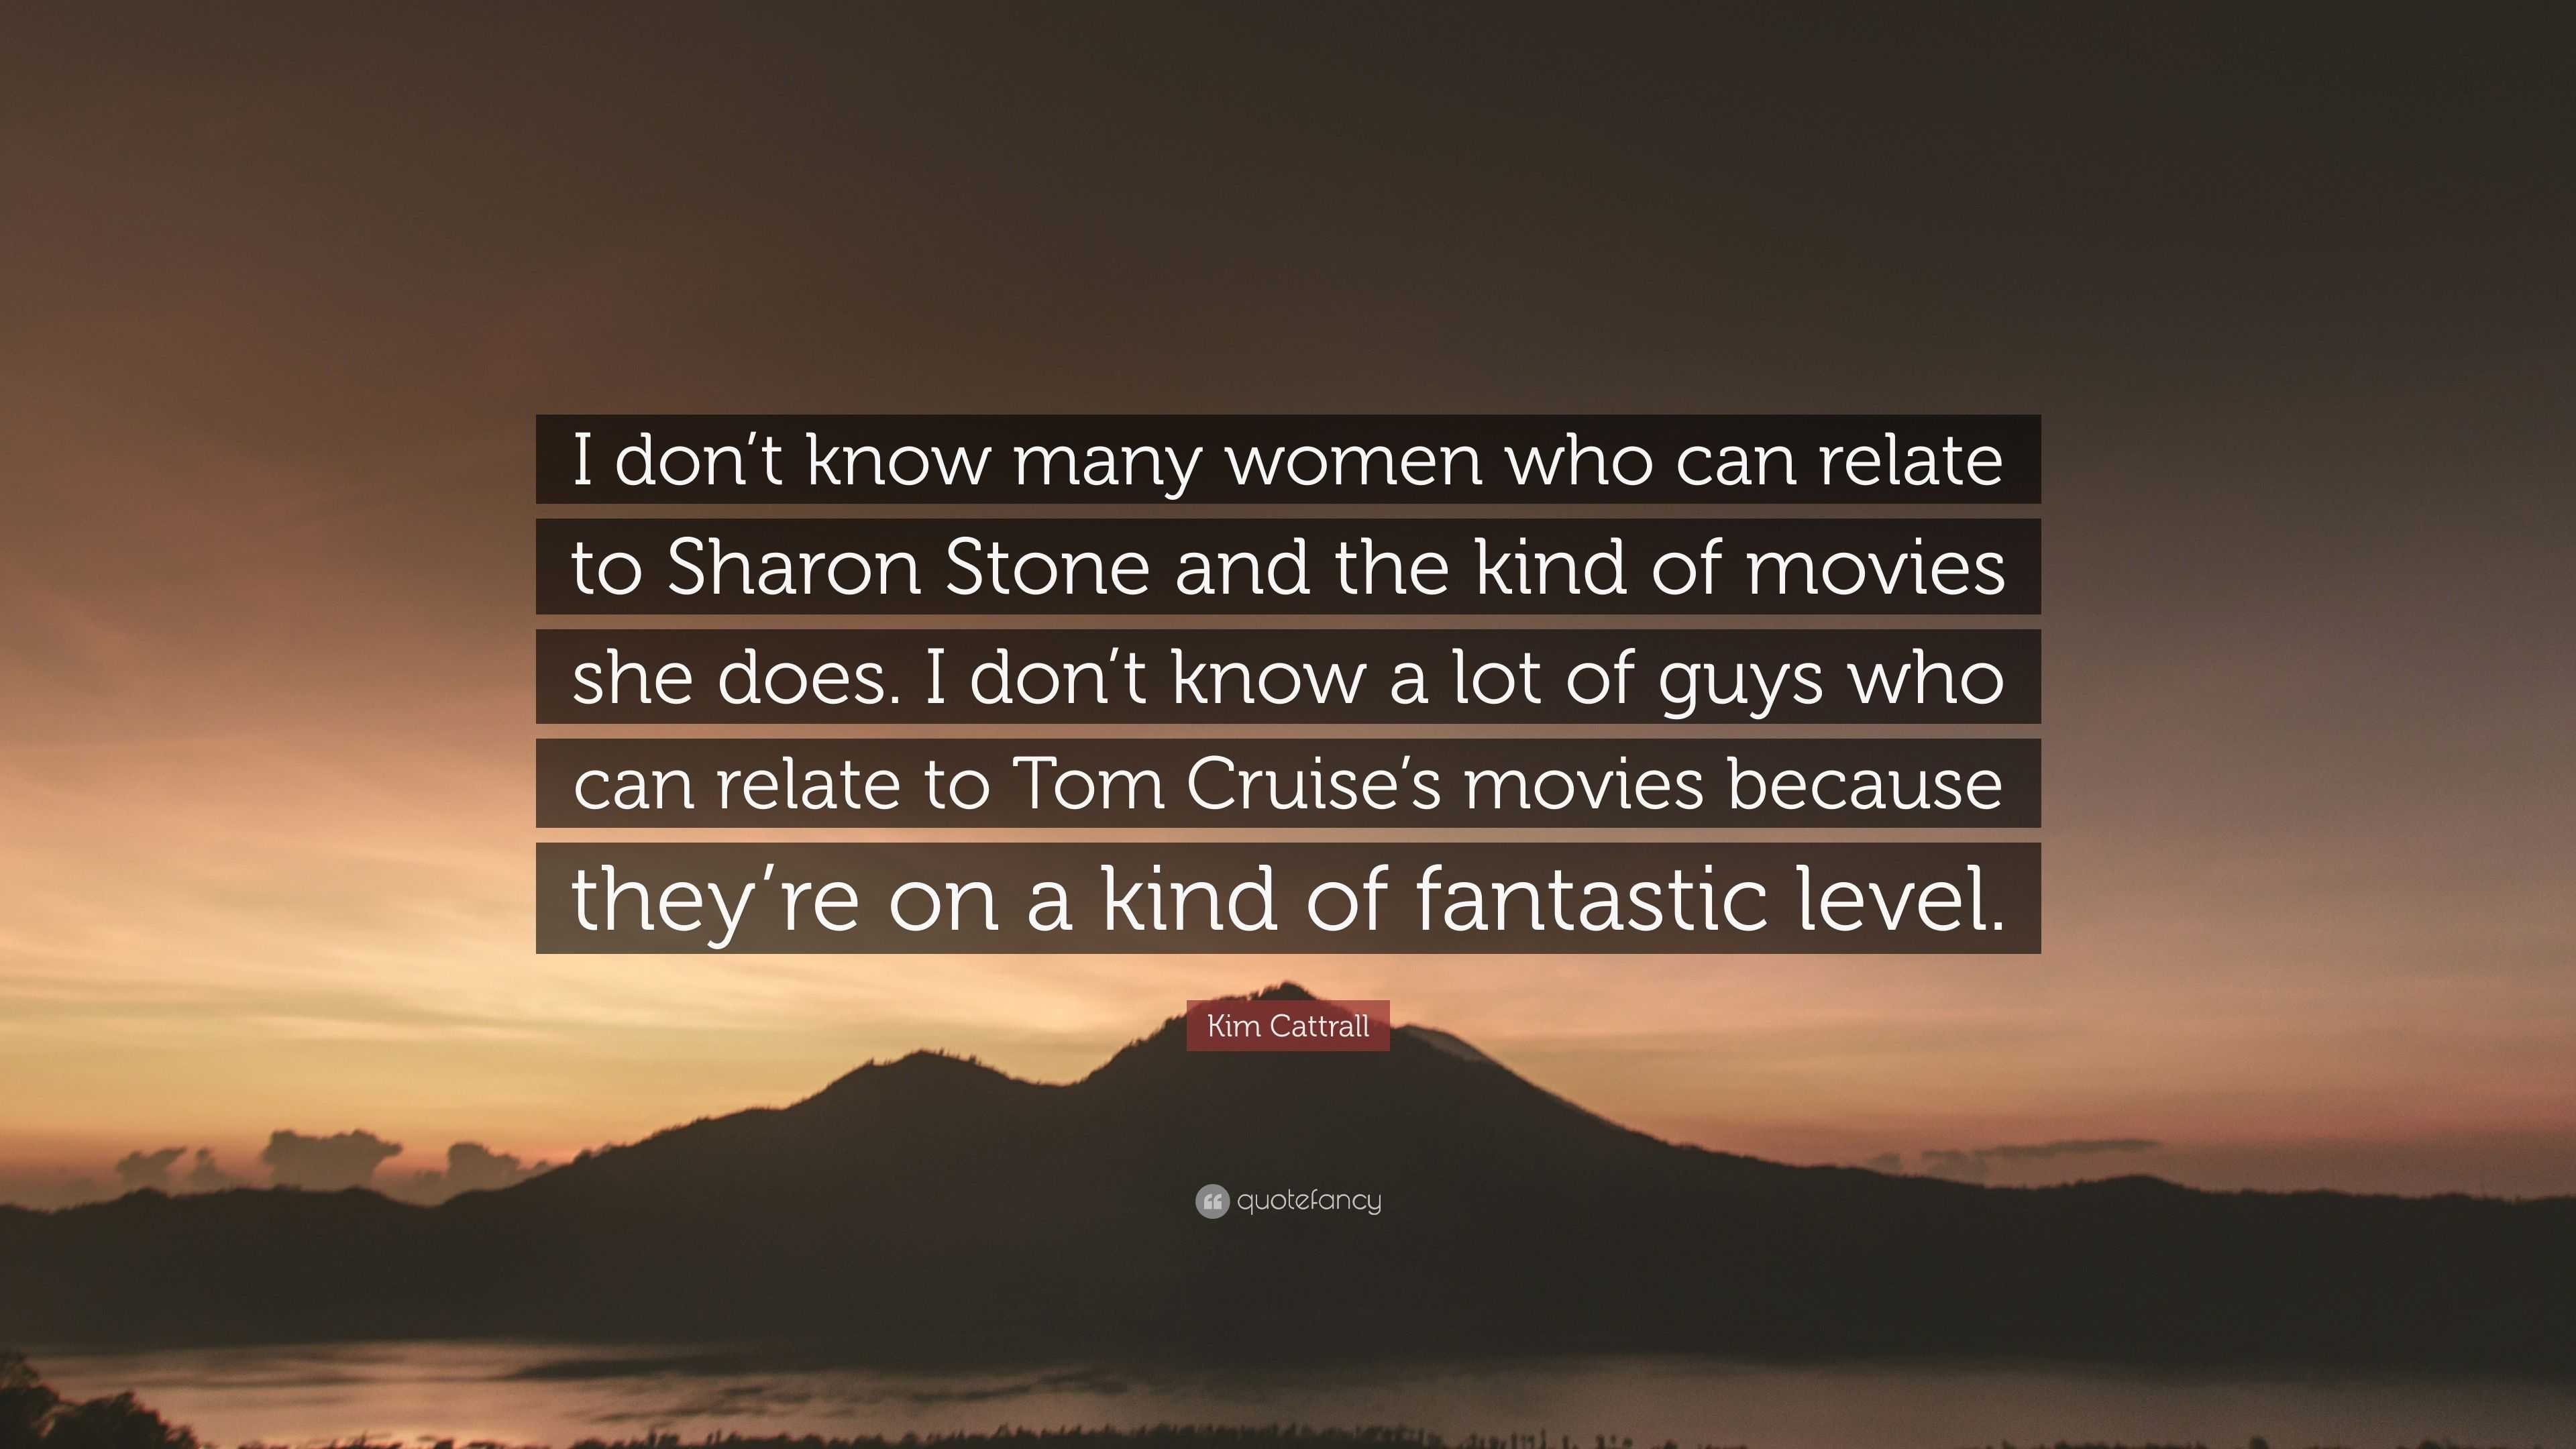 Kim Cattrall Quote I Don T Know Many Women Who Can Relate To Sharon Stone And The Kind Of Movies She Does I Don T Know A Lot Of Guys Who C